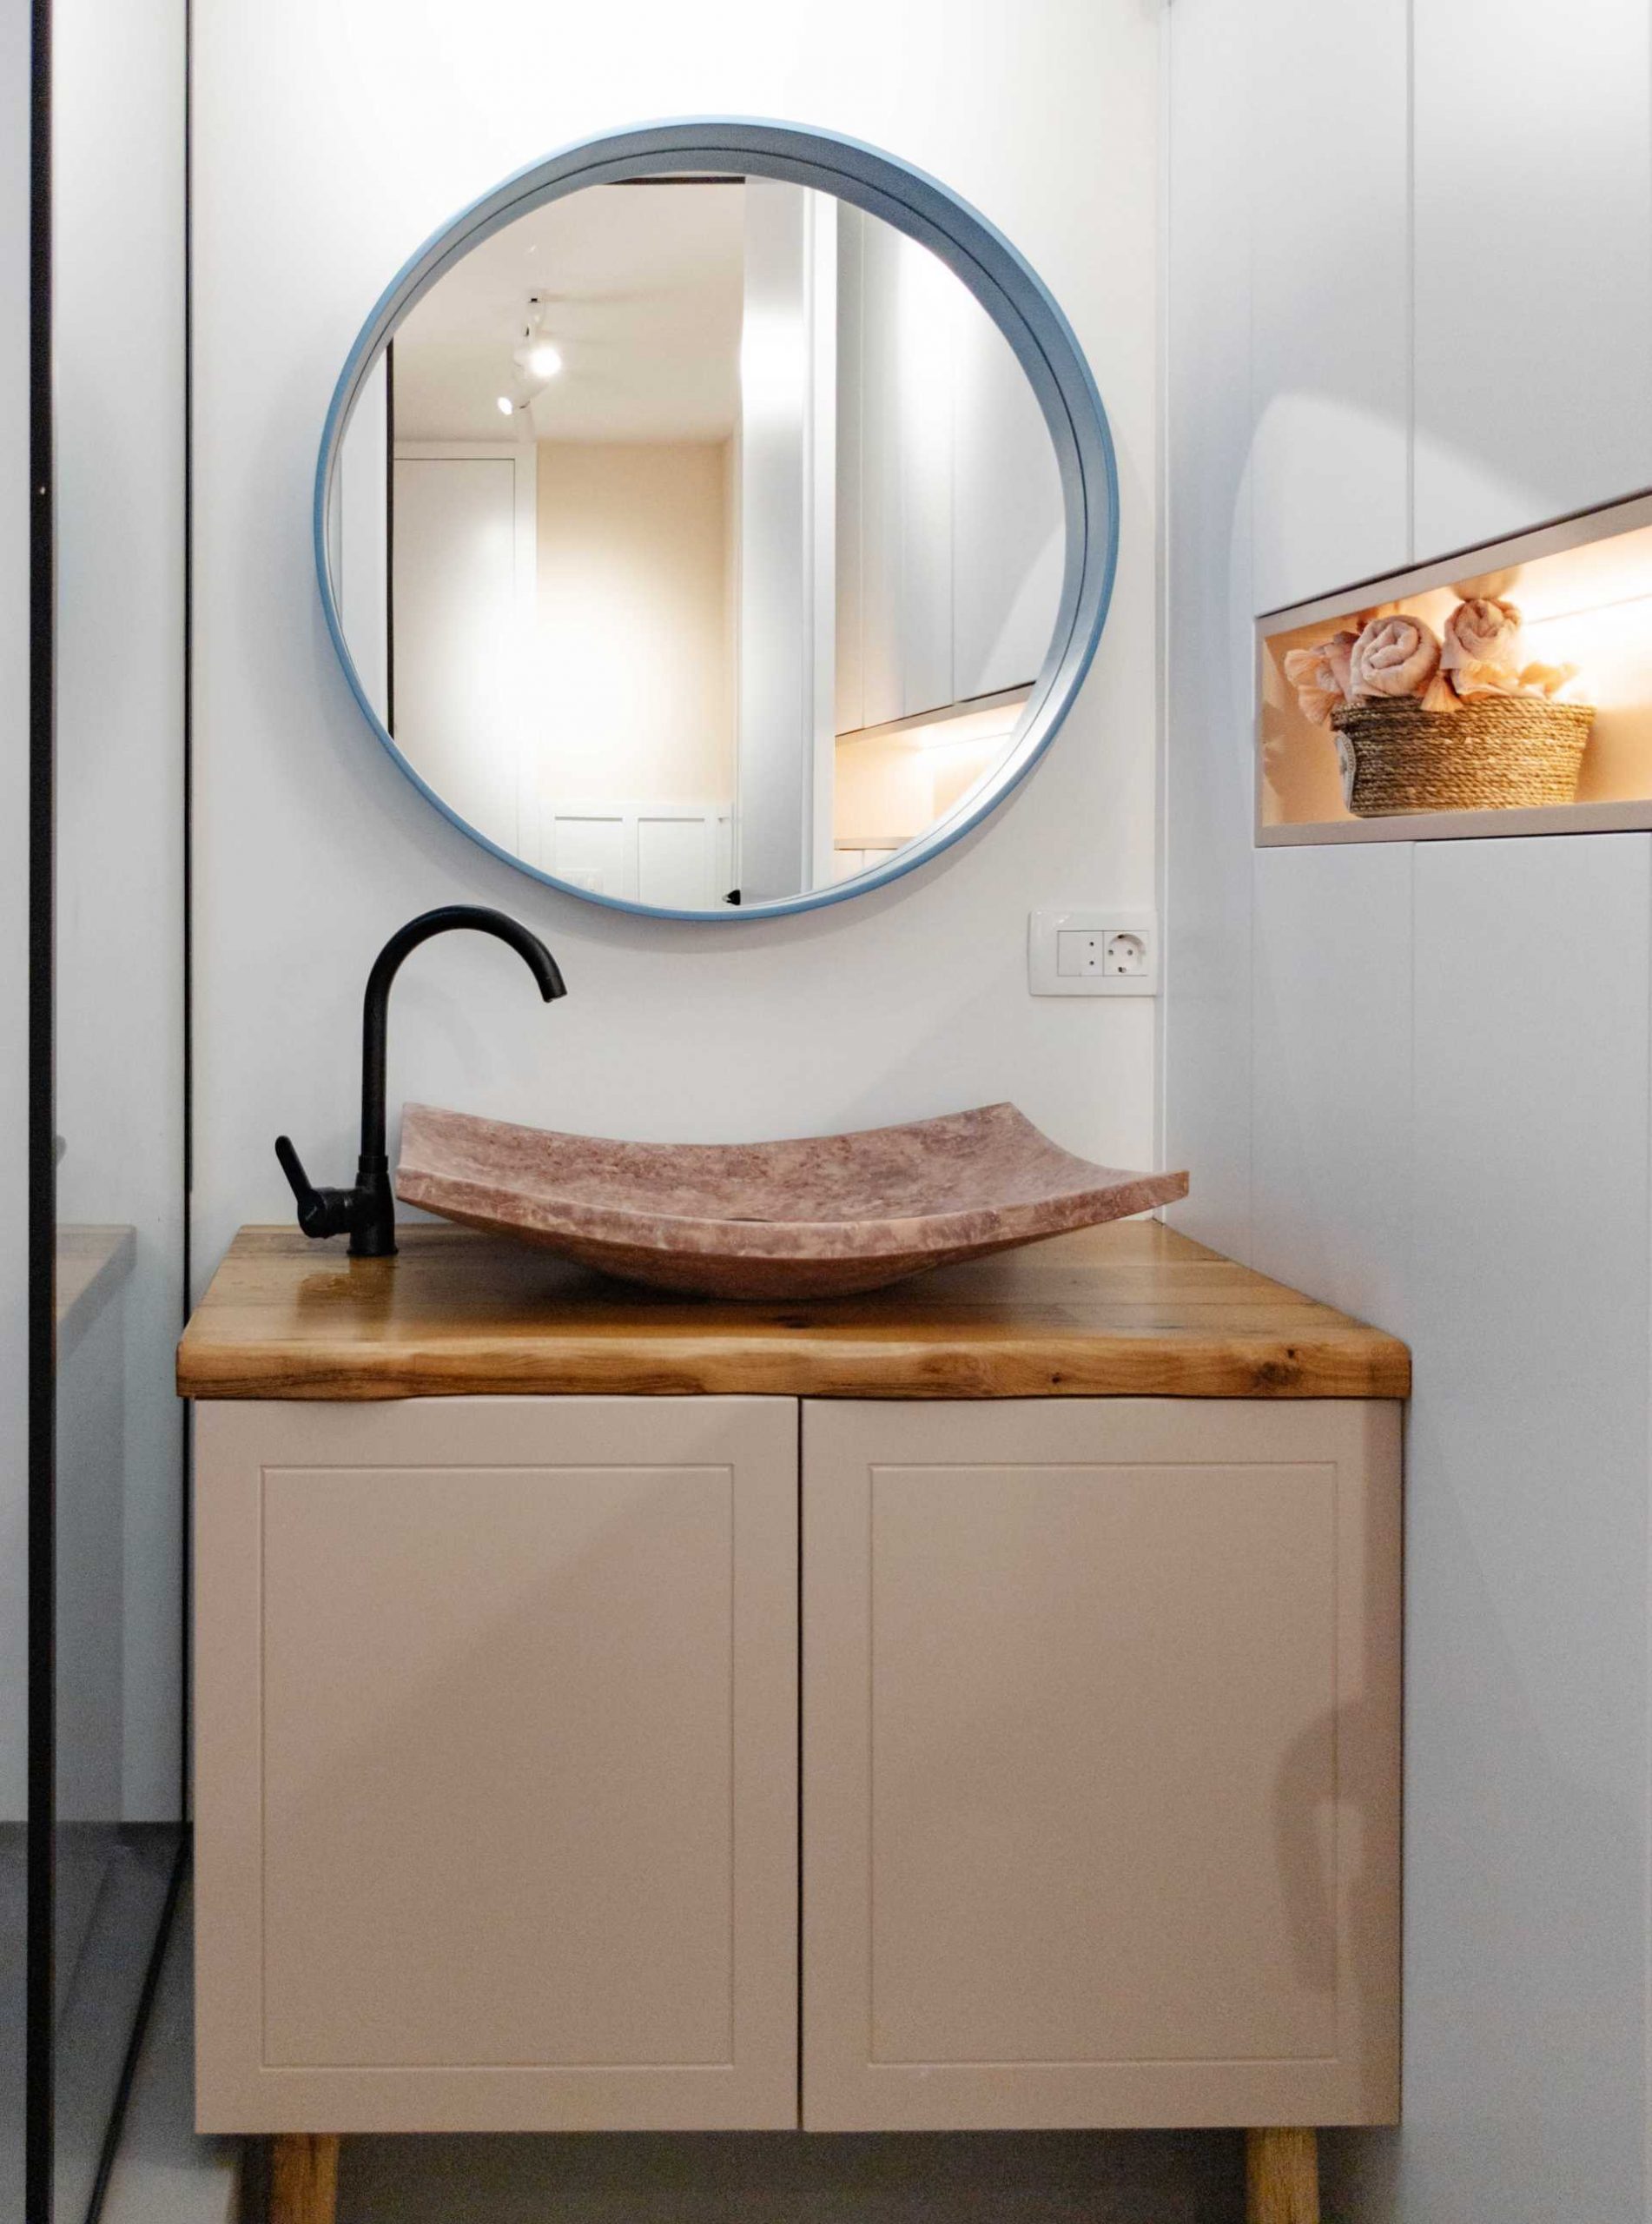 In this small and contemporary bathroom, there's a wood vanity with a blue-framed round mirror above, and a built-in cabinet with a shelving niche.